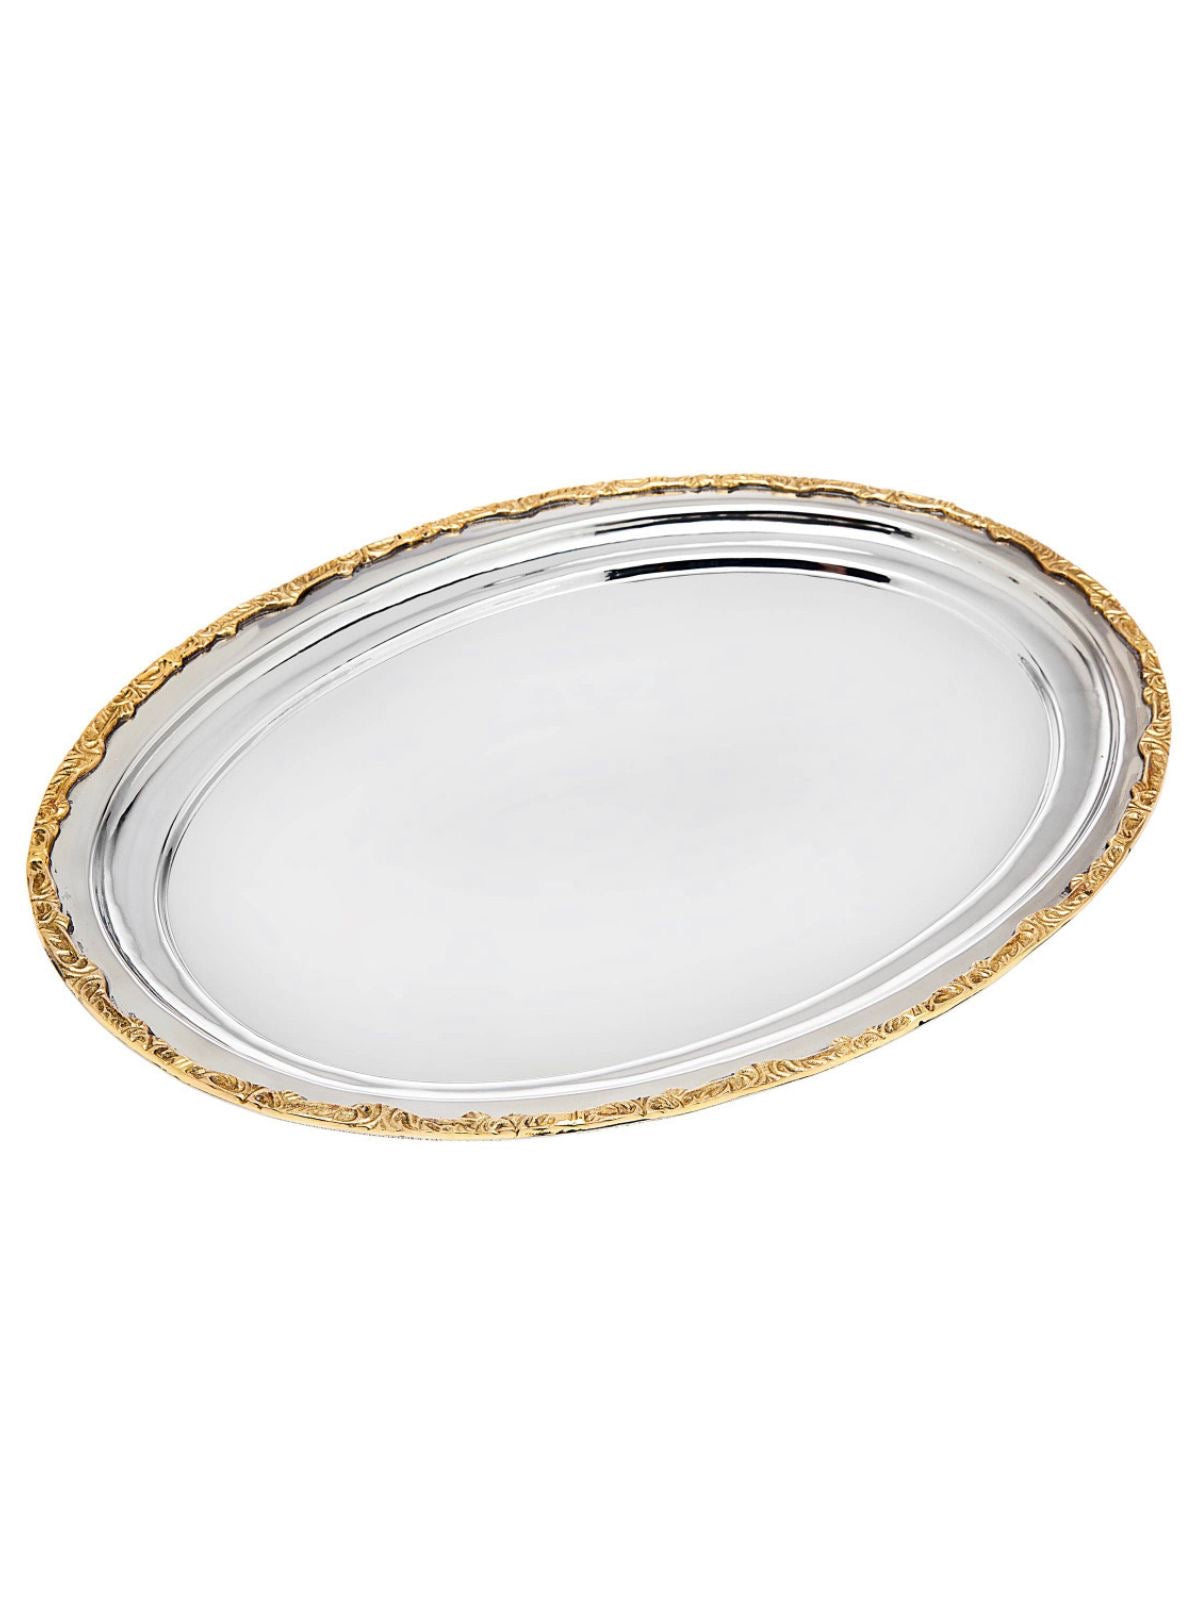 Stainless Steel Oval Serving Tray With Gold Rim Sold by KYA Home Decor.